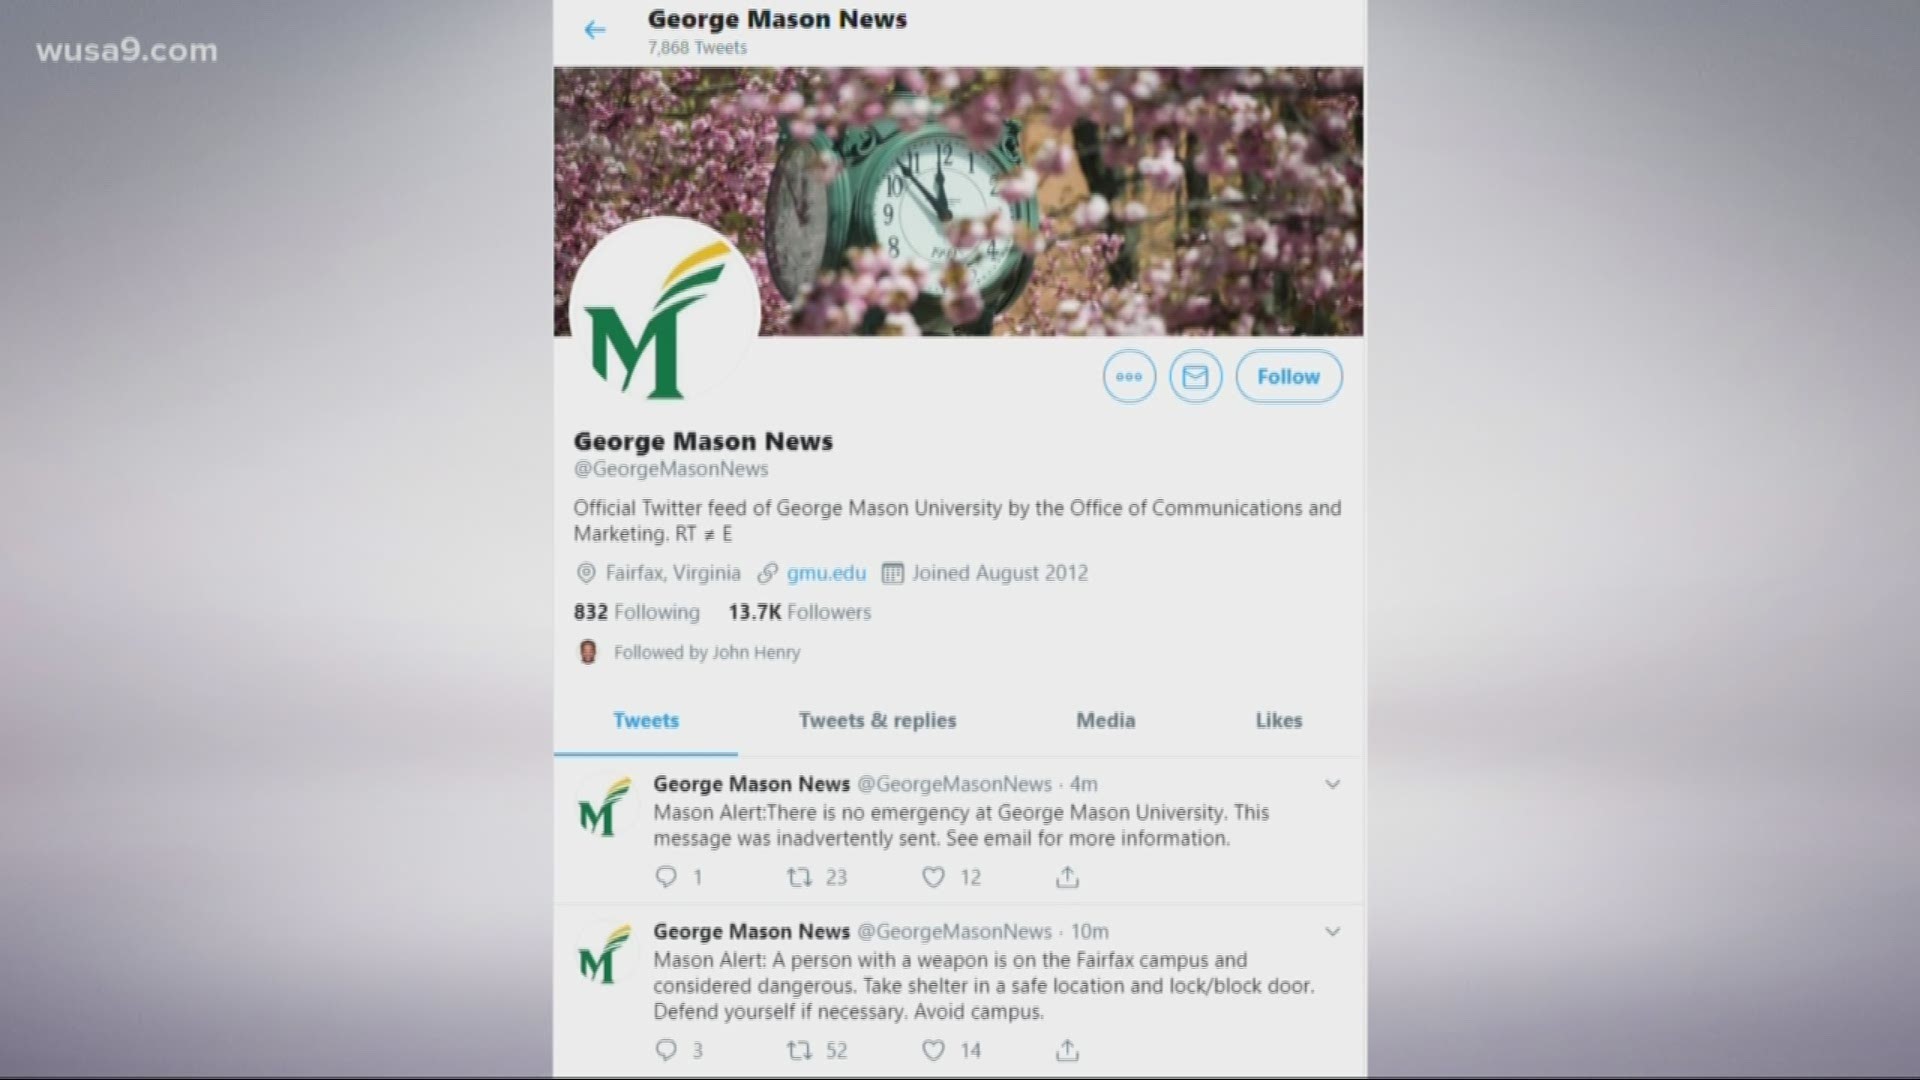 George Mason University "inadvertently" sent an alert telling students, staff members and faculty to shelter in place because there was a person with a weapon on the Fairfax, Virginia campus Tuesday morning.